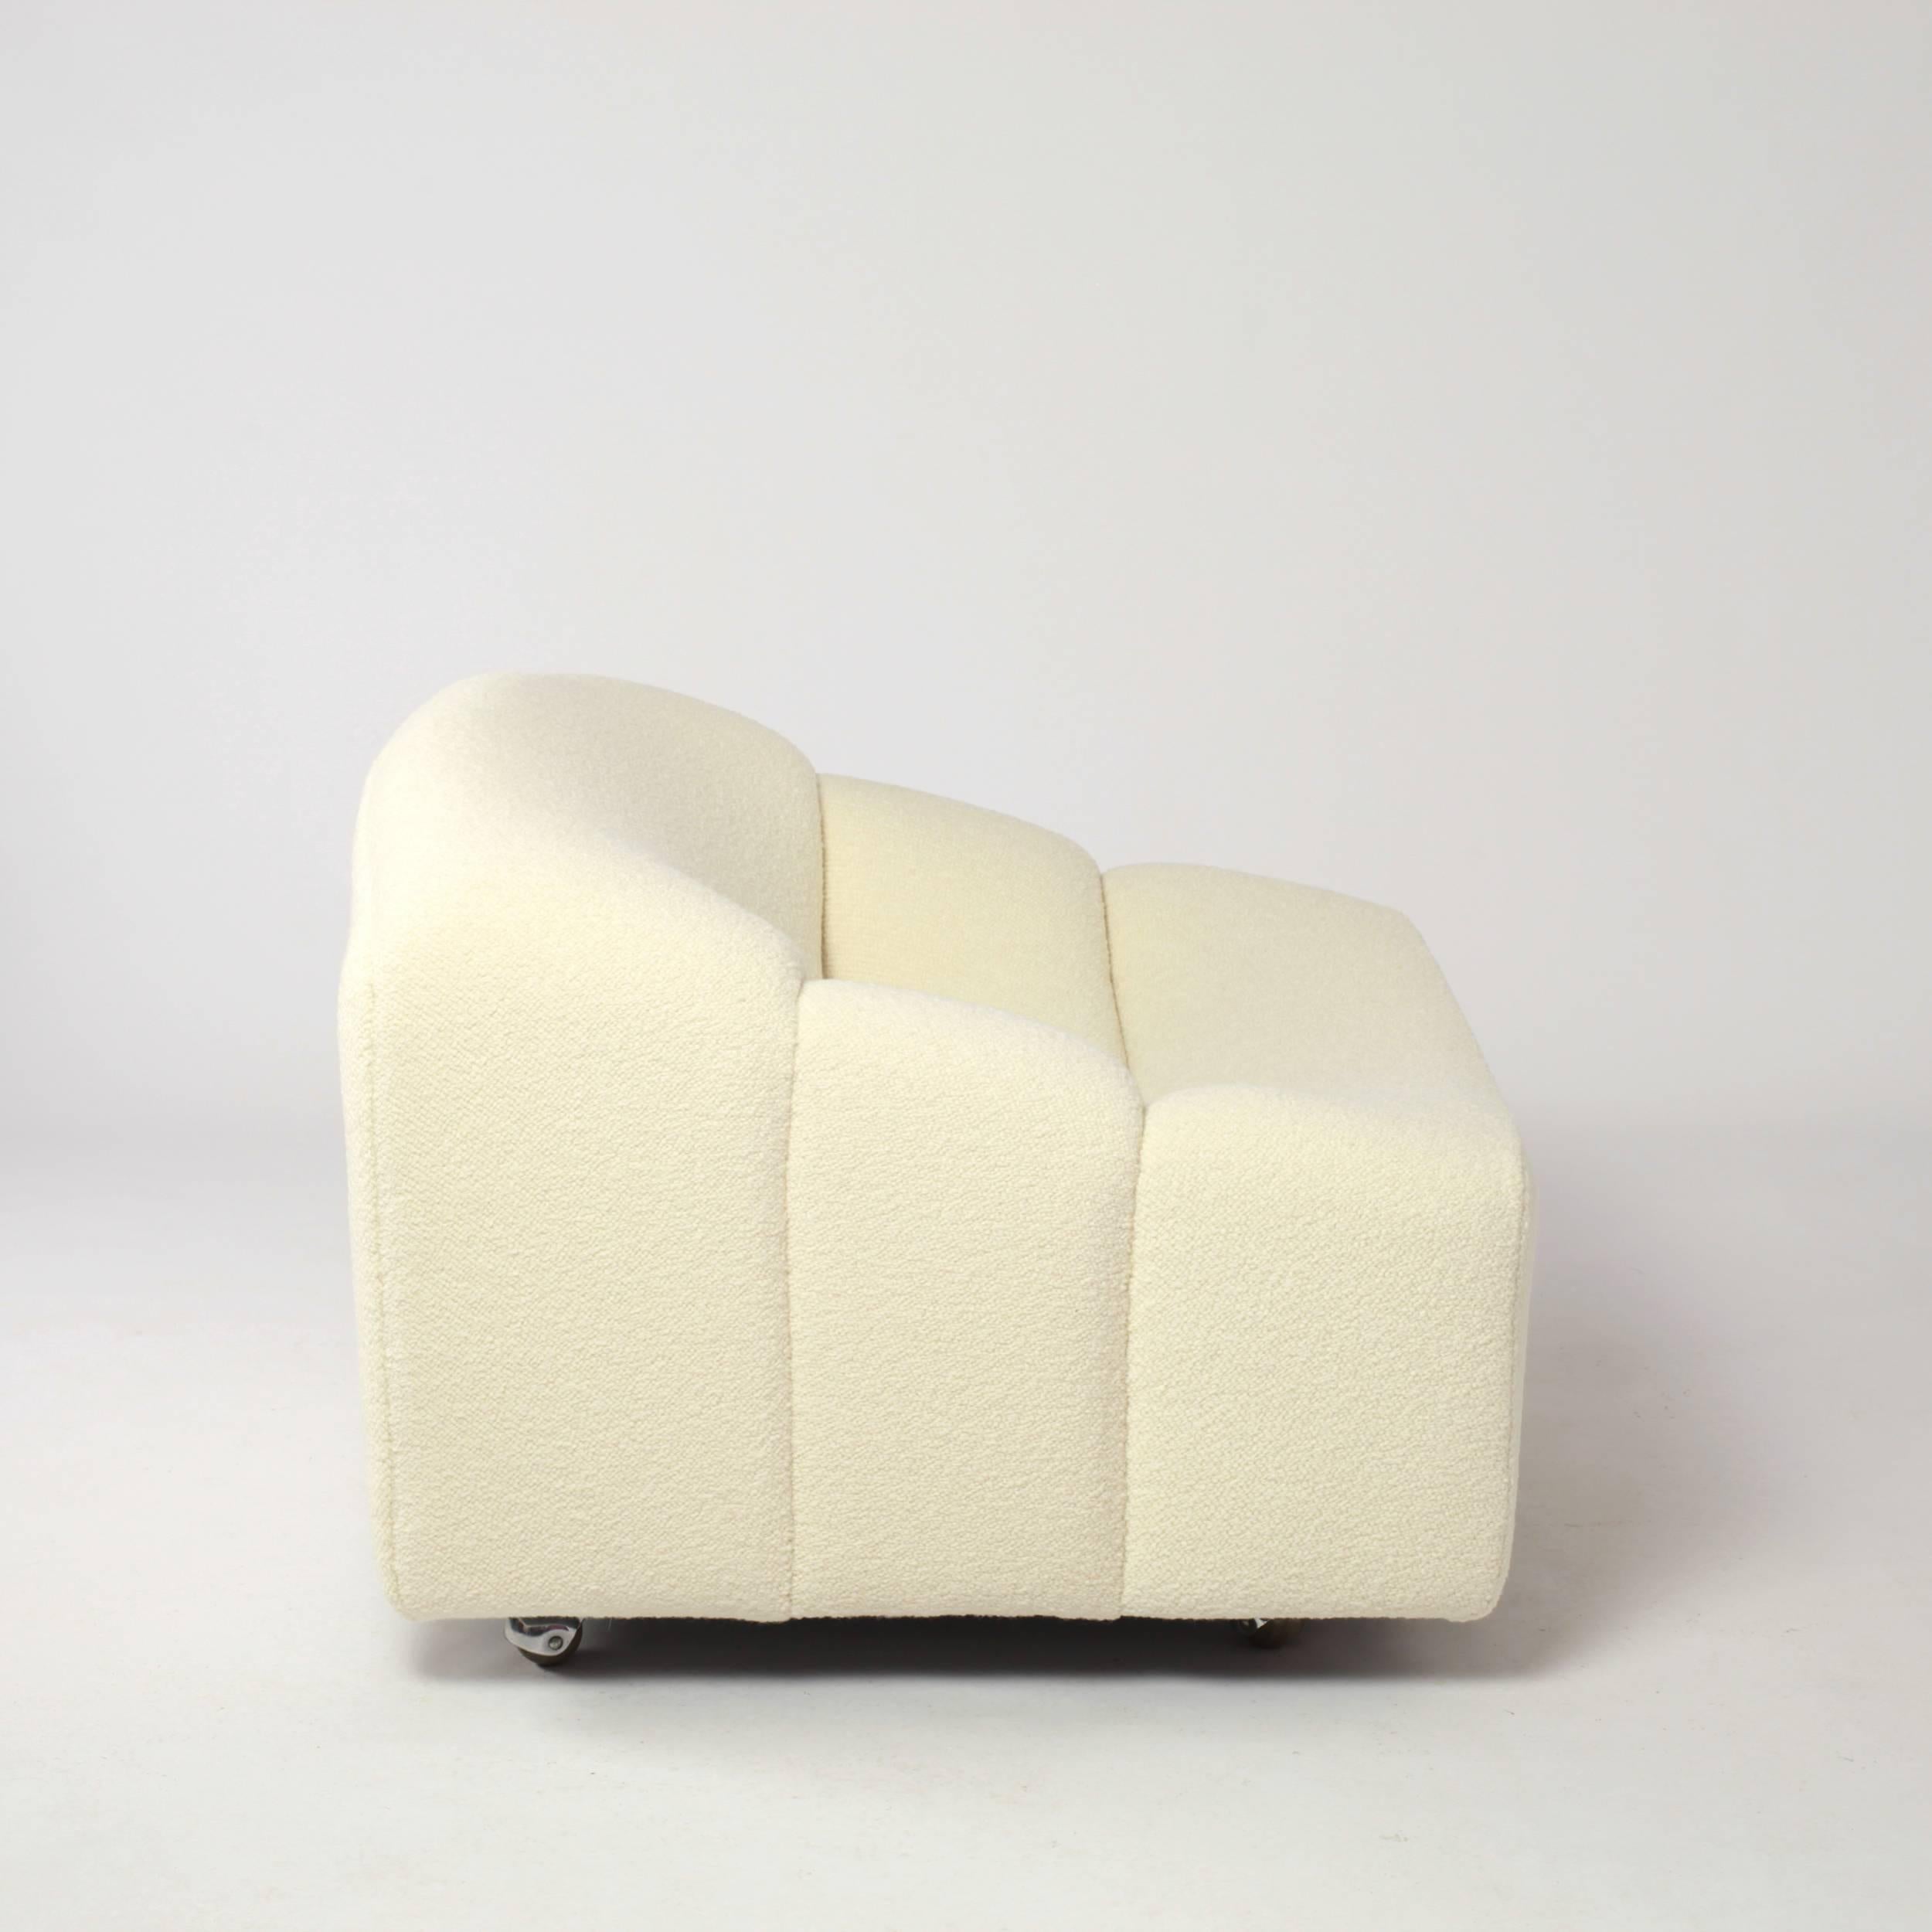 Mid-20th Century Pierre Paulin ABCD Armchair for Artifort 1968 Fabric Pierre Frey